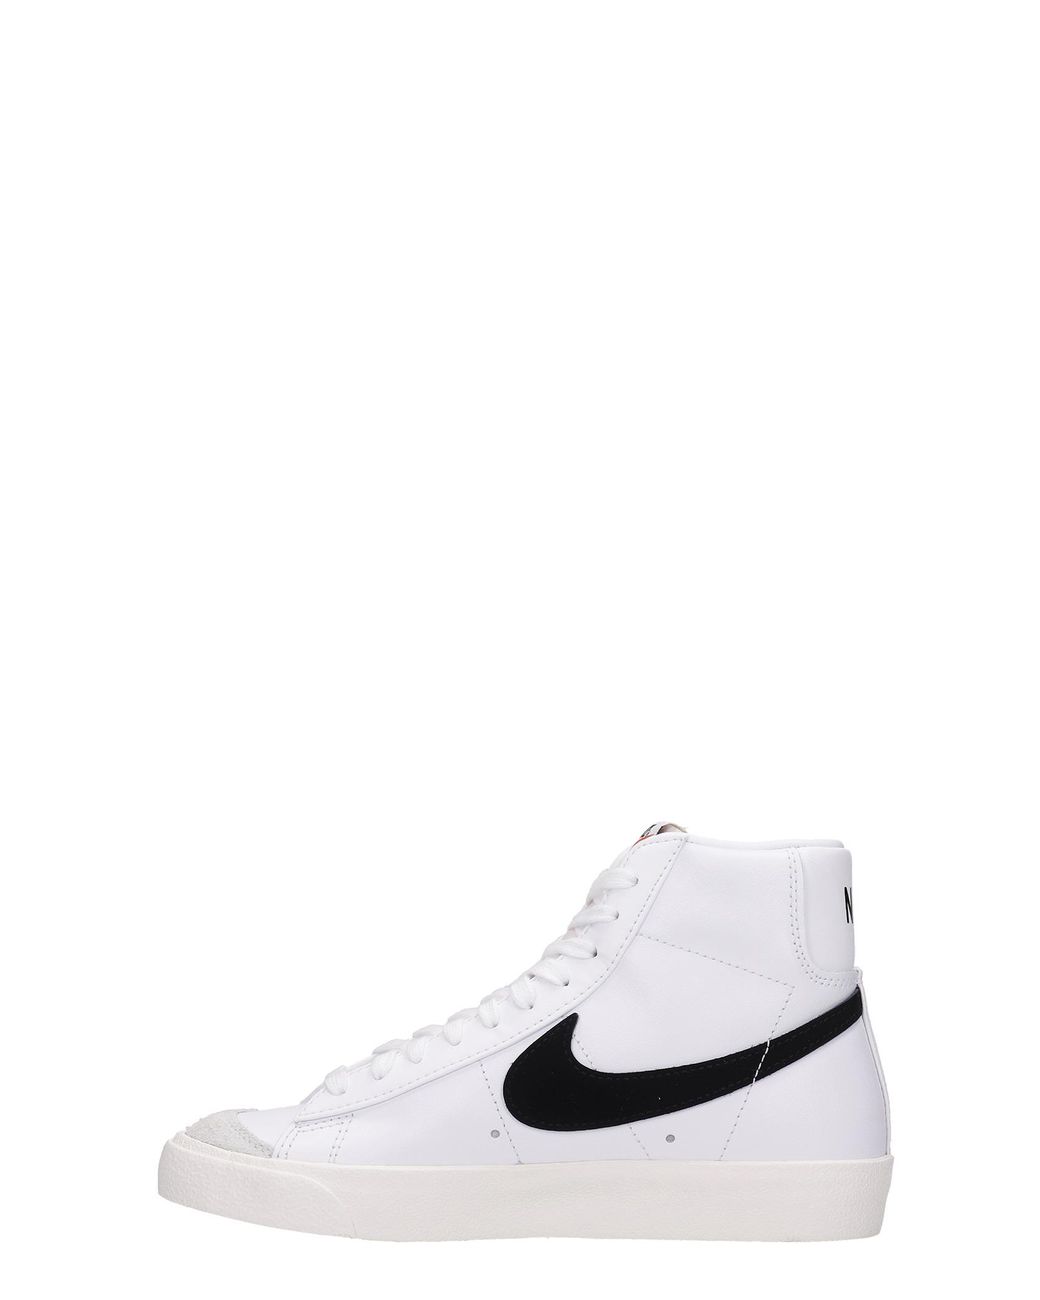 Nike Blazer Mid 77 Sneakers In White Leather | Lyst